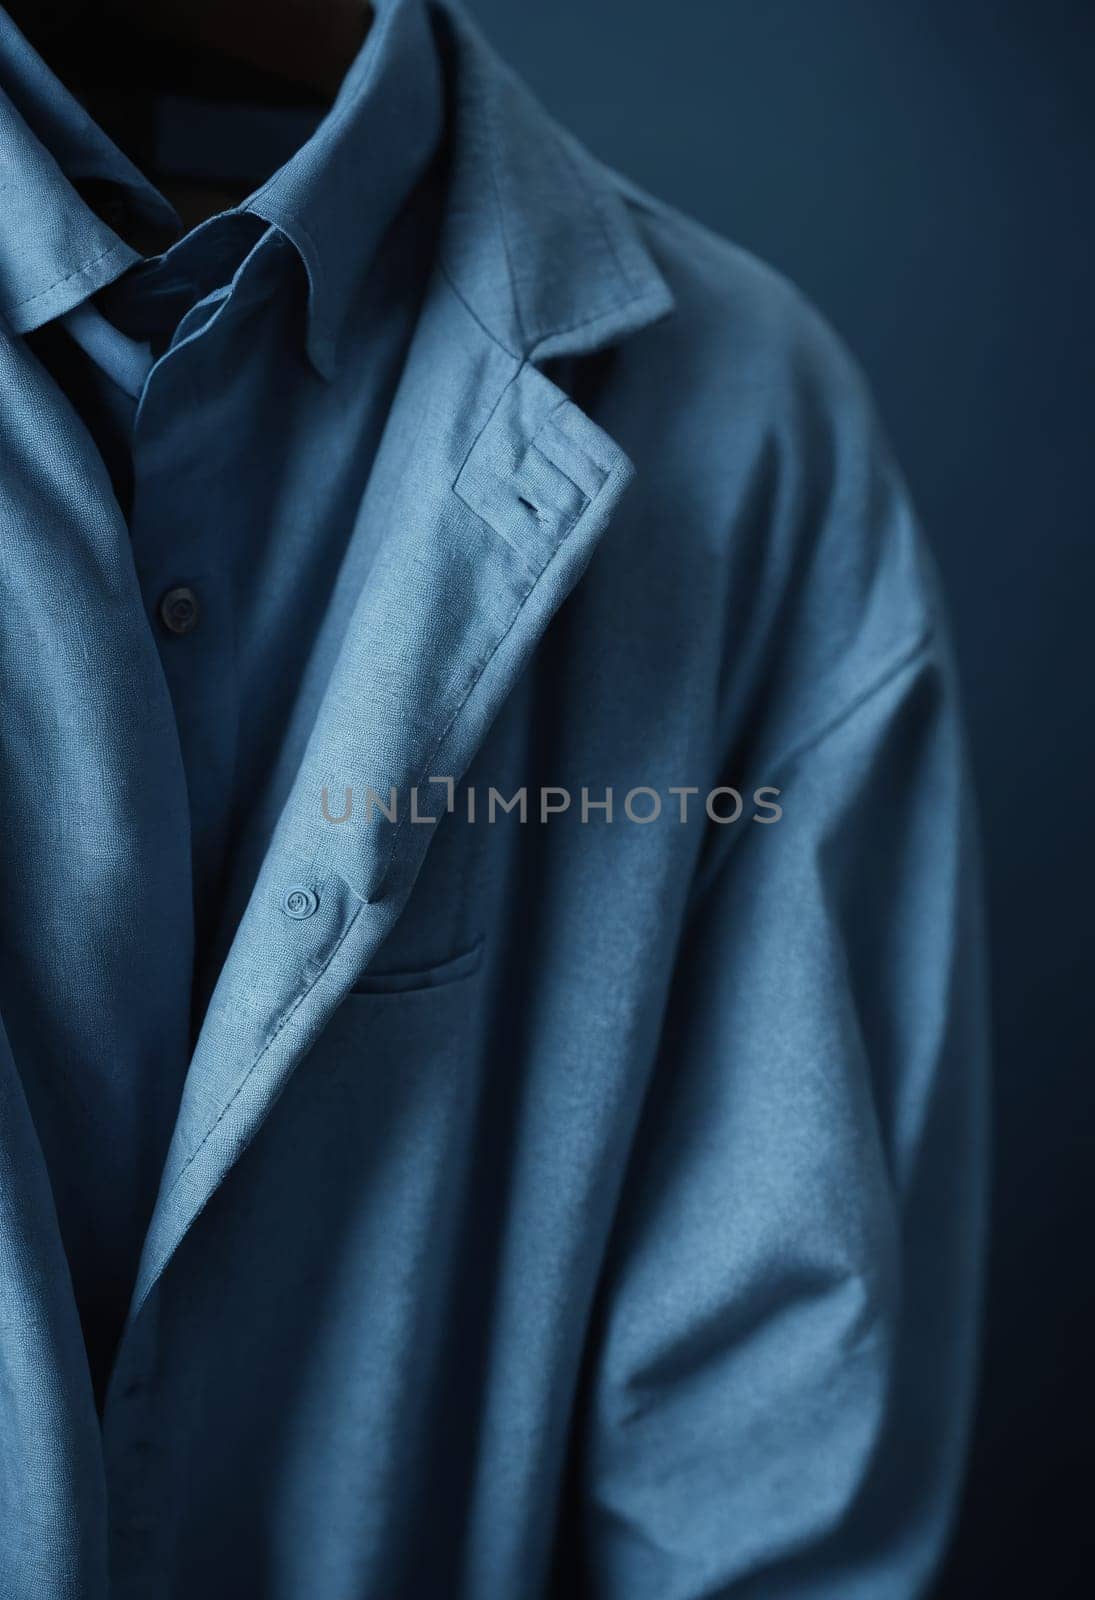 Showcasing a neatly ironed, classic blue dress shirt complete with a left breast pocket and stylish brown buttons. An icon of professionalism and timeless style.